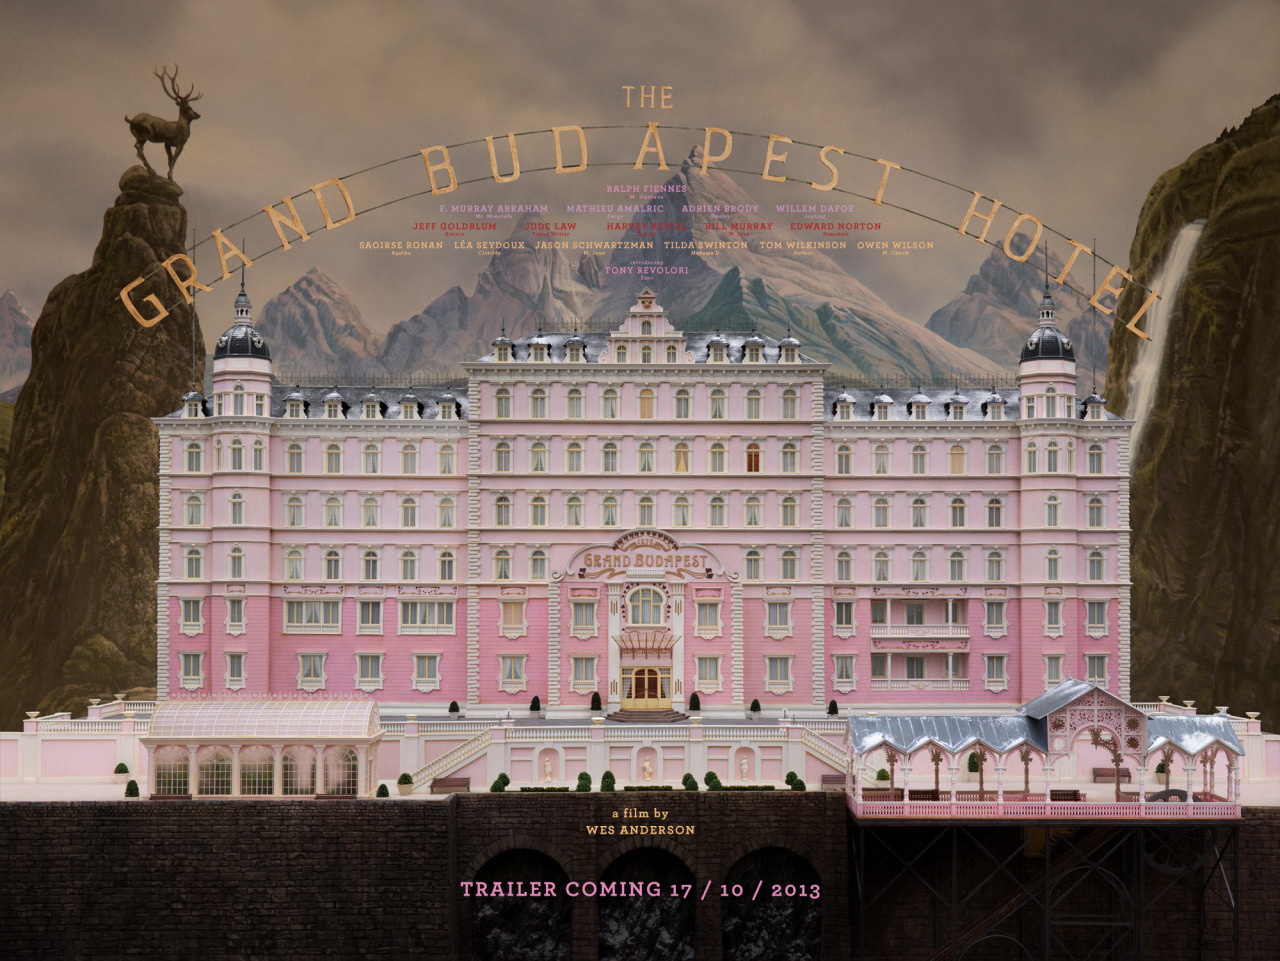 (via The Grand Budapest Hotel - A Film by Wes Anderson - Trailer Coming 17 October 2013)